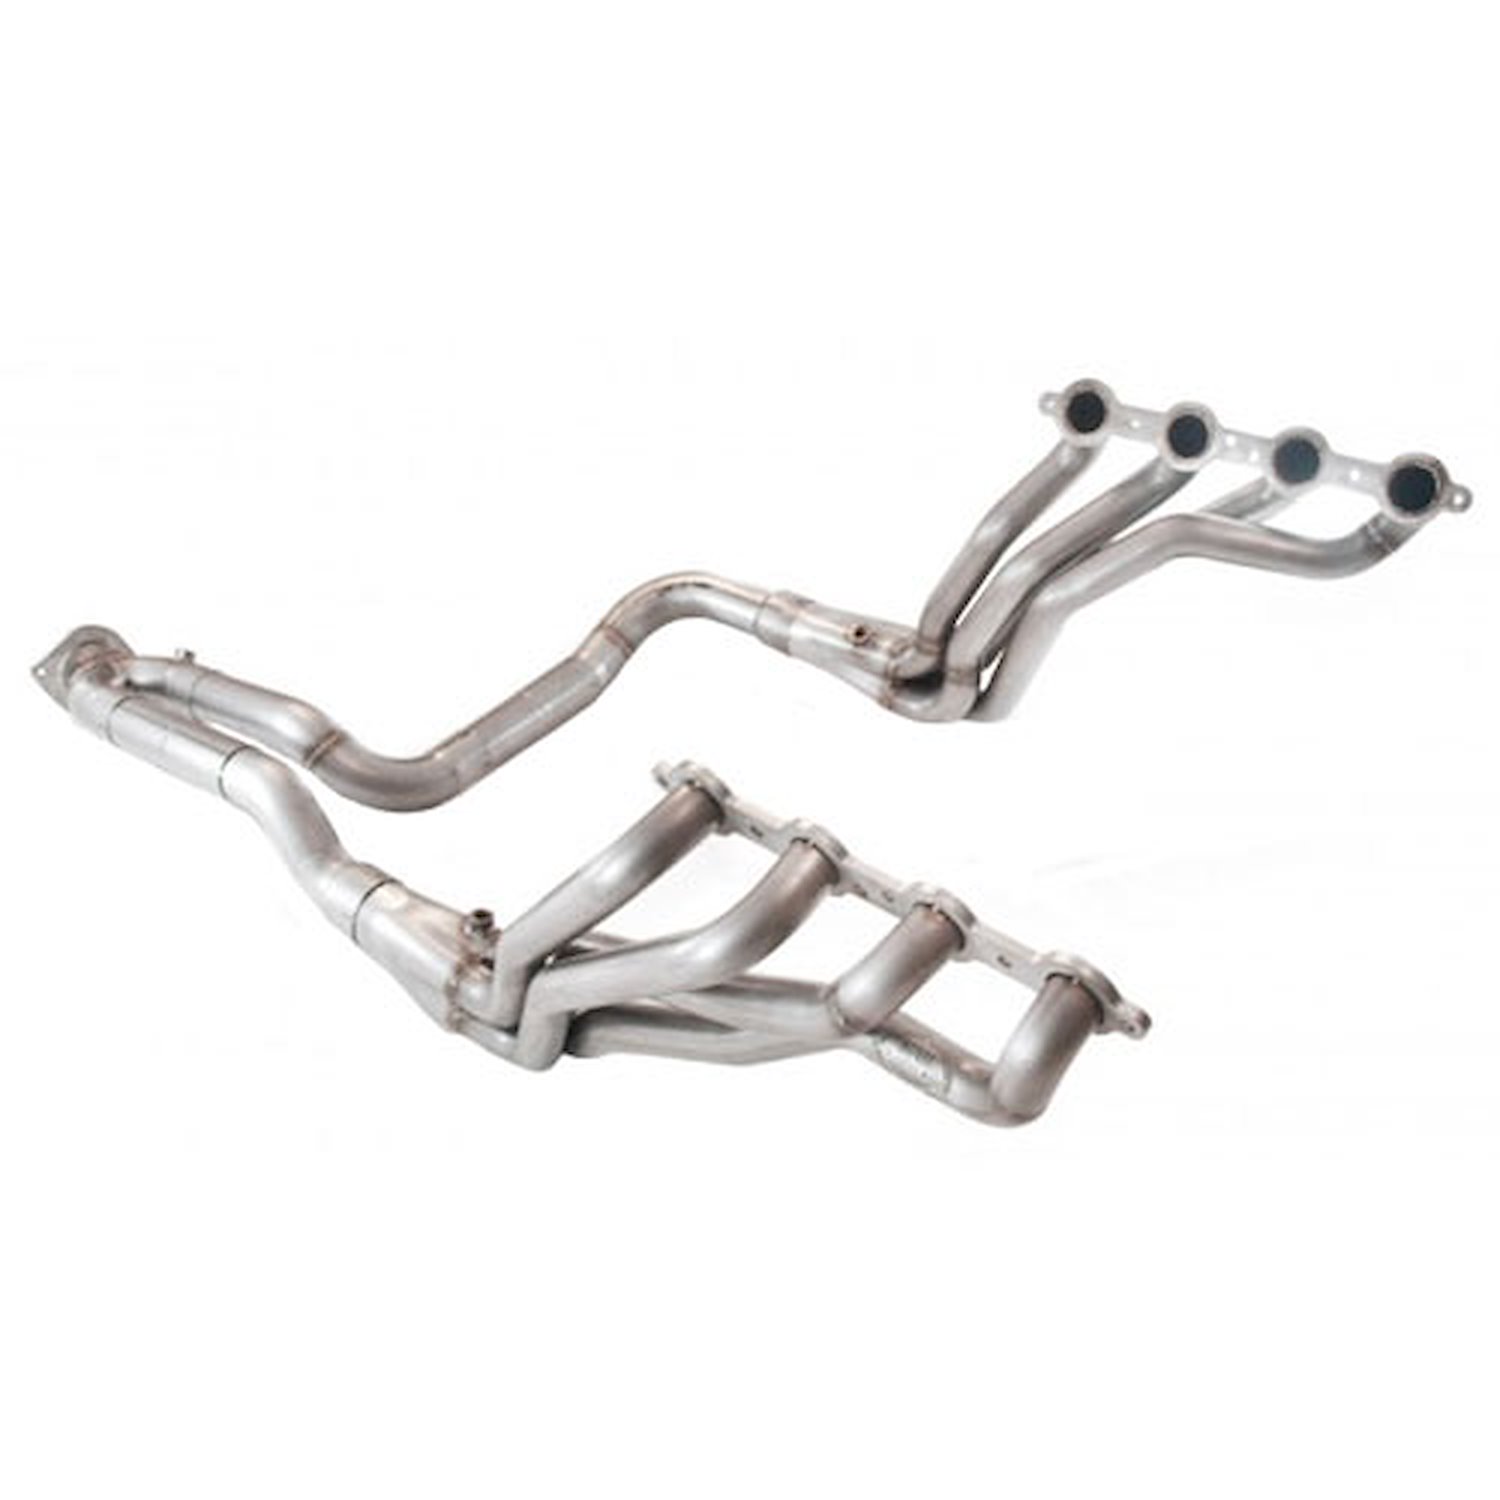 2006-2009 CHEVY 6.0L TRAILBLAZER SS LONG TUBE SS HEADERS WITH 1.750 PRIMARIES AND 2.500 Y-PIPE OFF-R